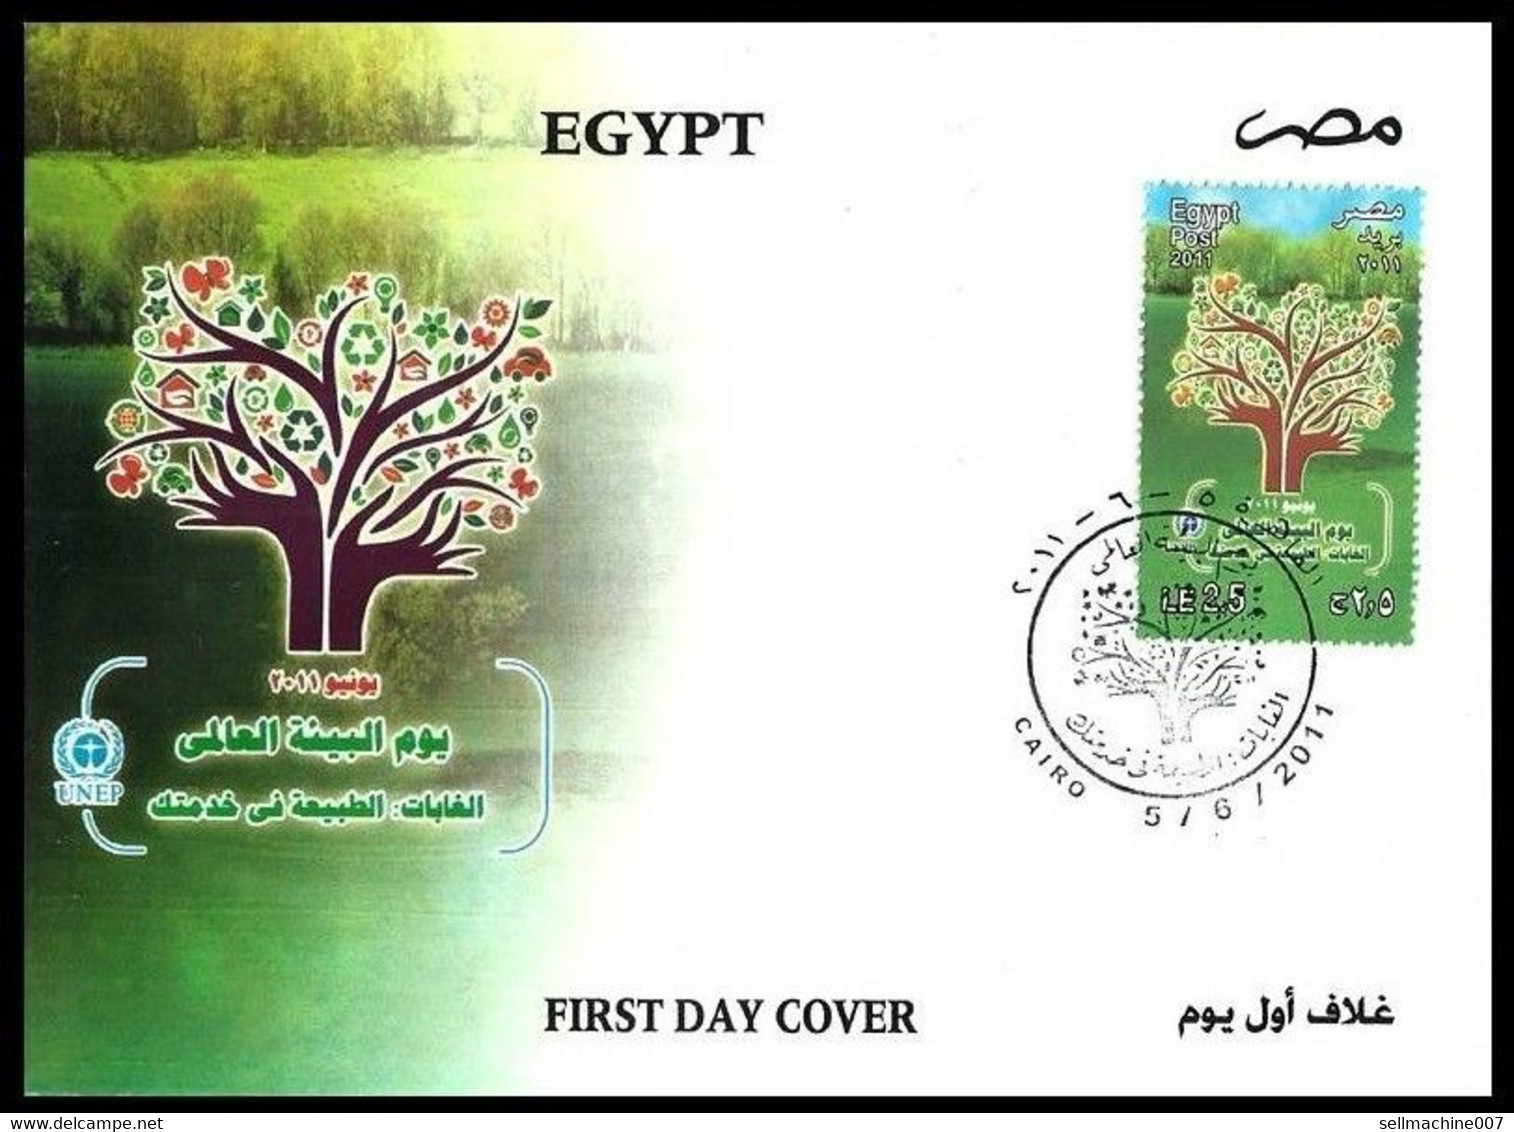 EGYPT 2011 FIRST DAY COVER / FDC ENVIRONMENT DAY / NATURAL FORESTS - Covers & Documents